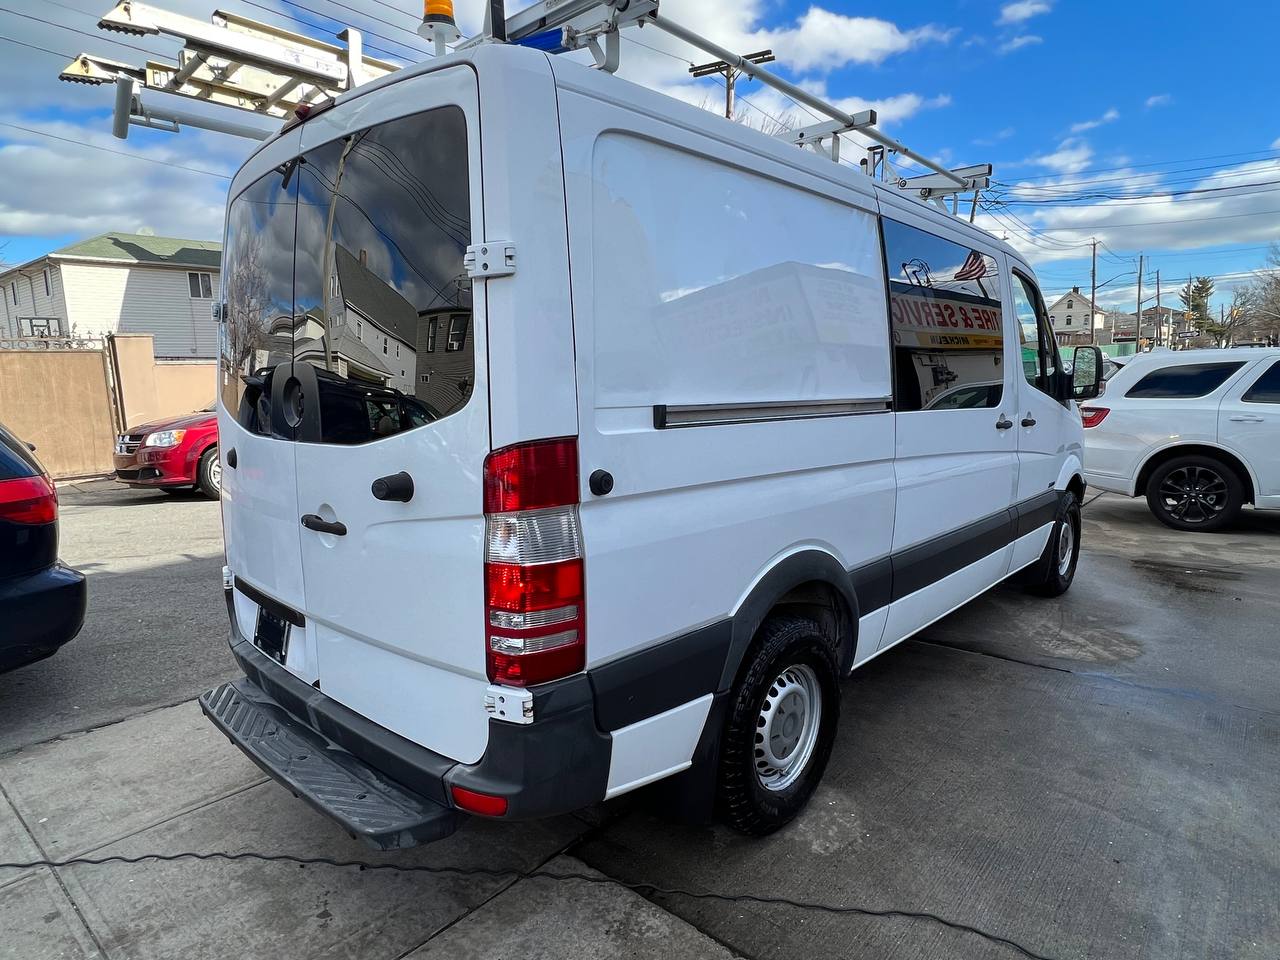 Used - Mersedes-Benz SPRINTER 2500 CARGO VAN for sale in Staten Island NY